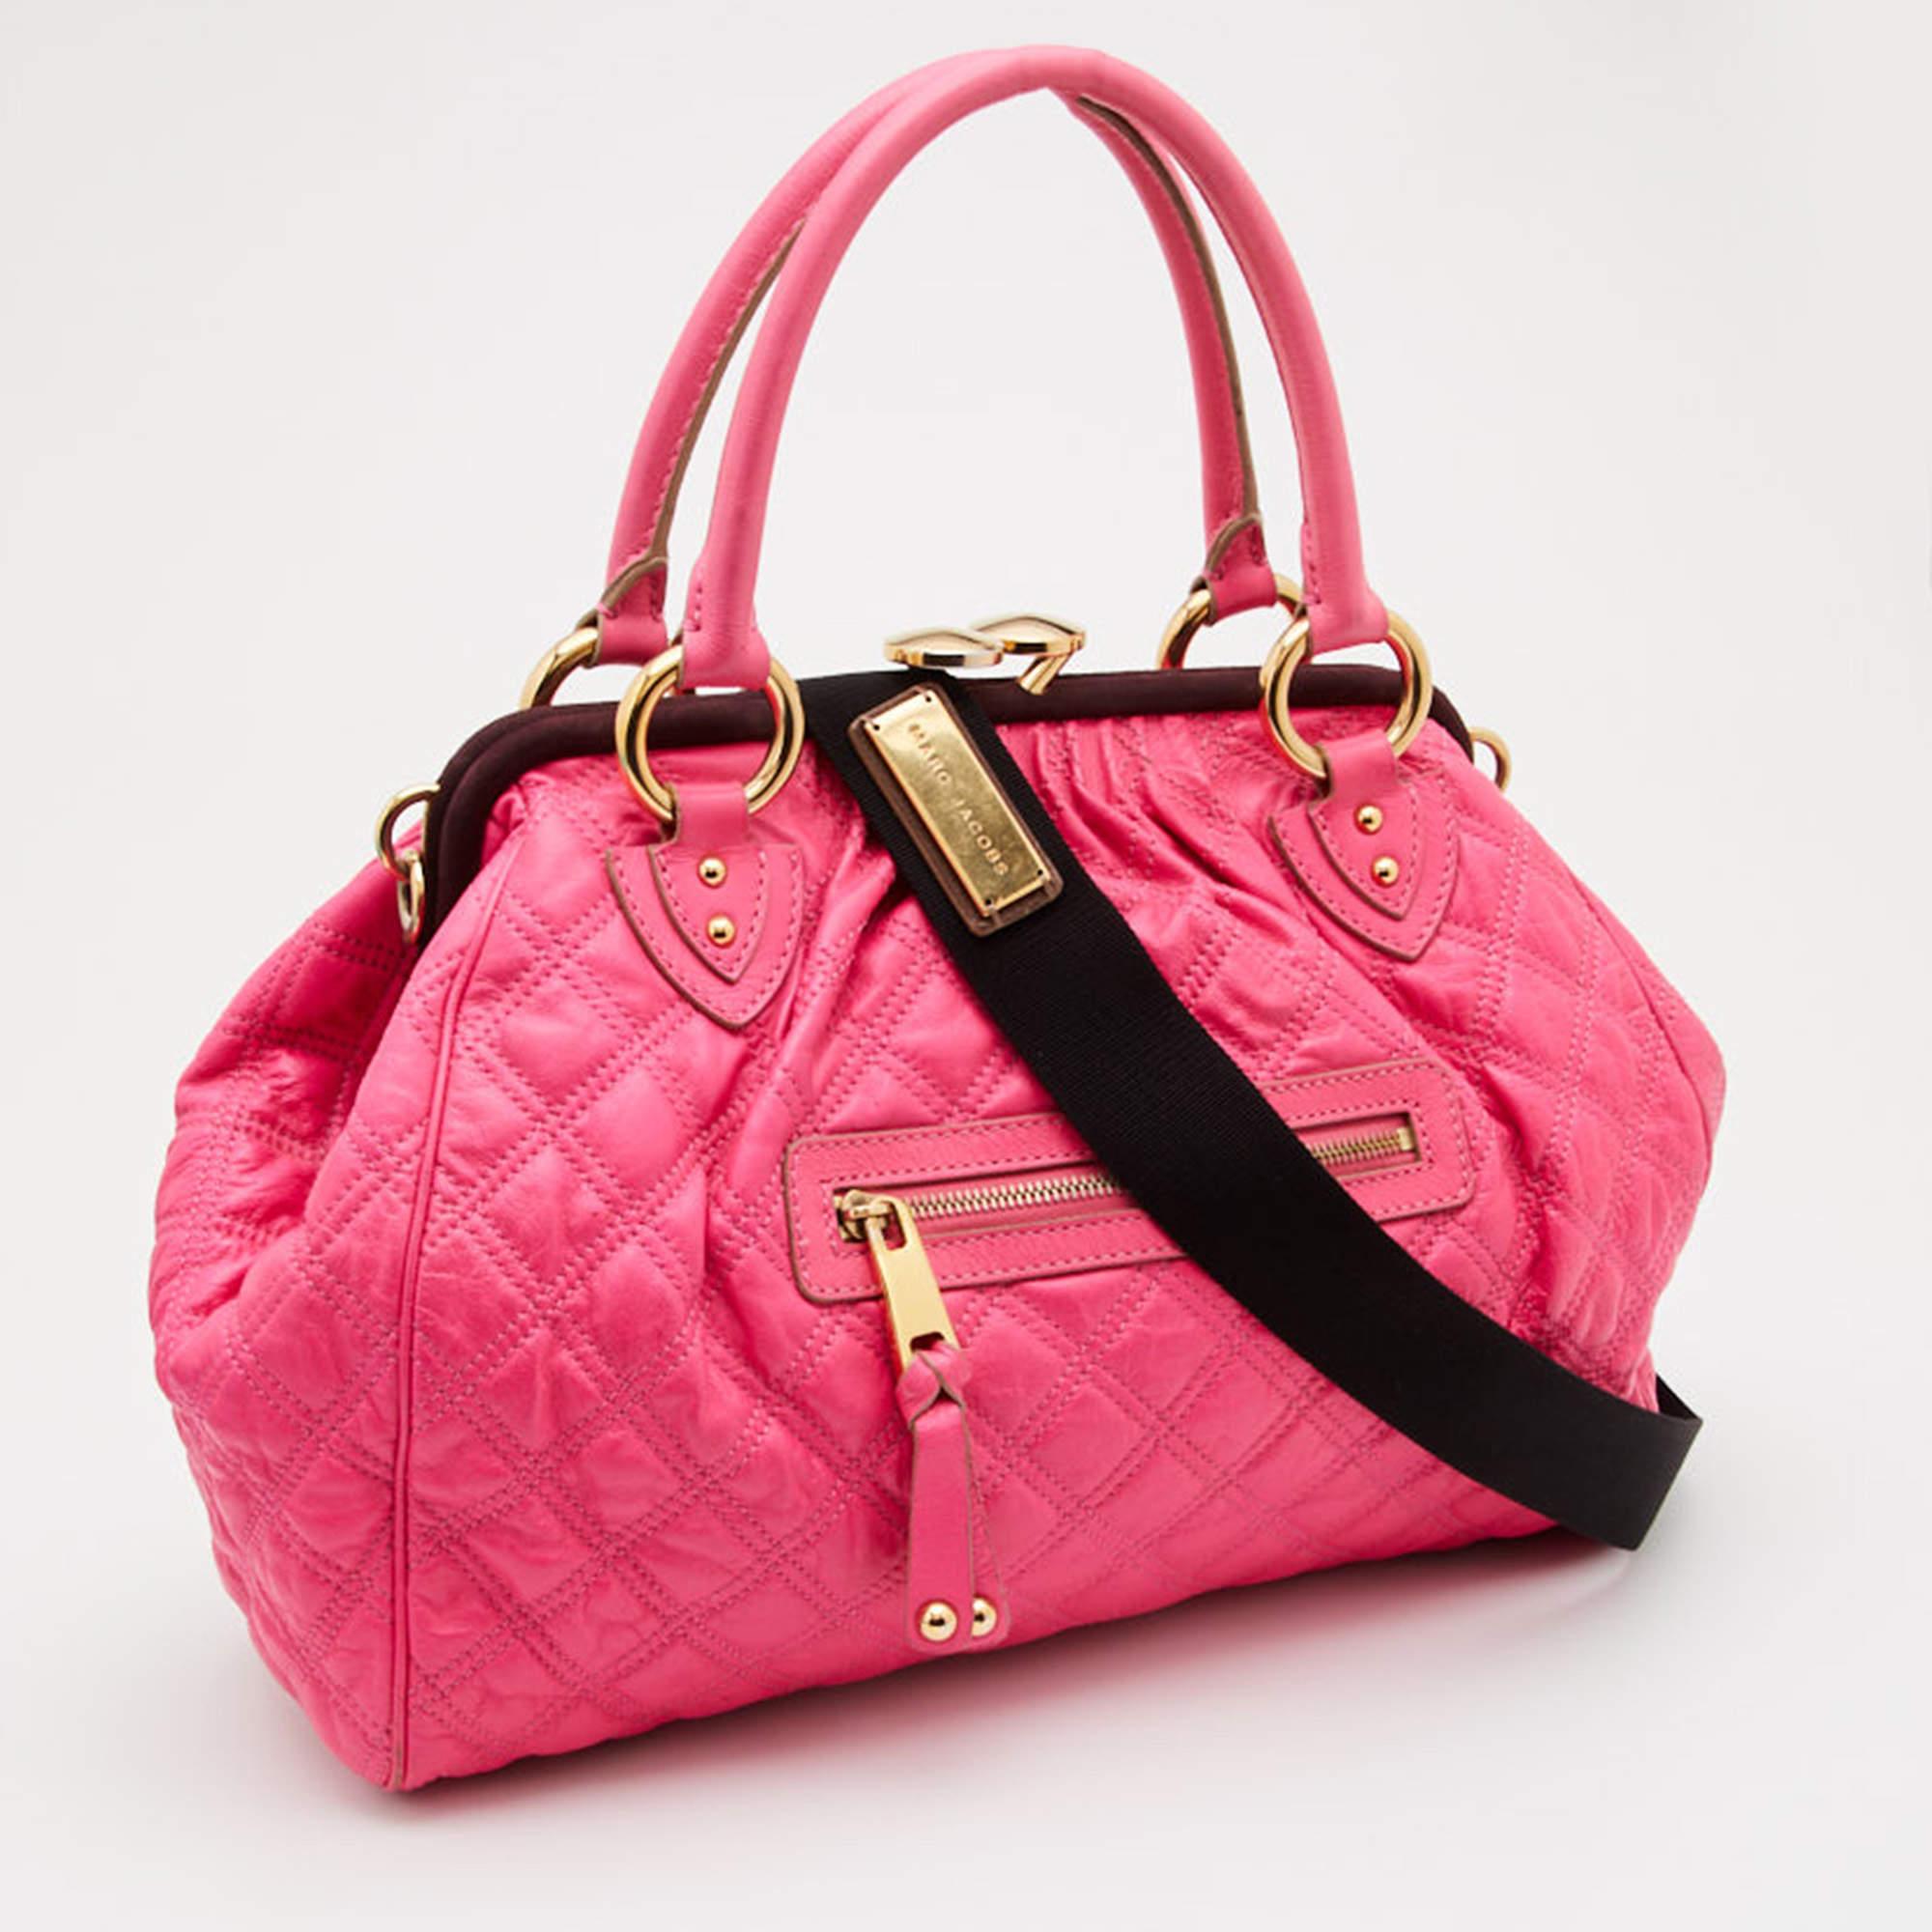 Men's Marc Jacobs Neon Pink Quilted Leather Stam Satchel